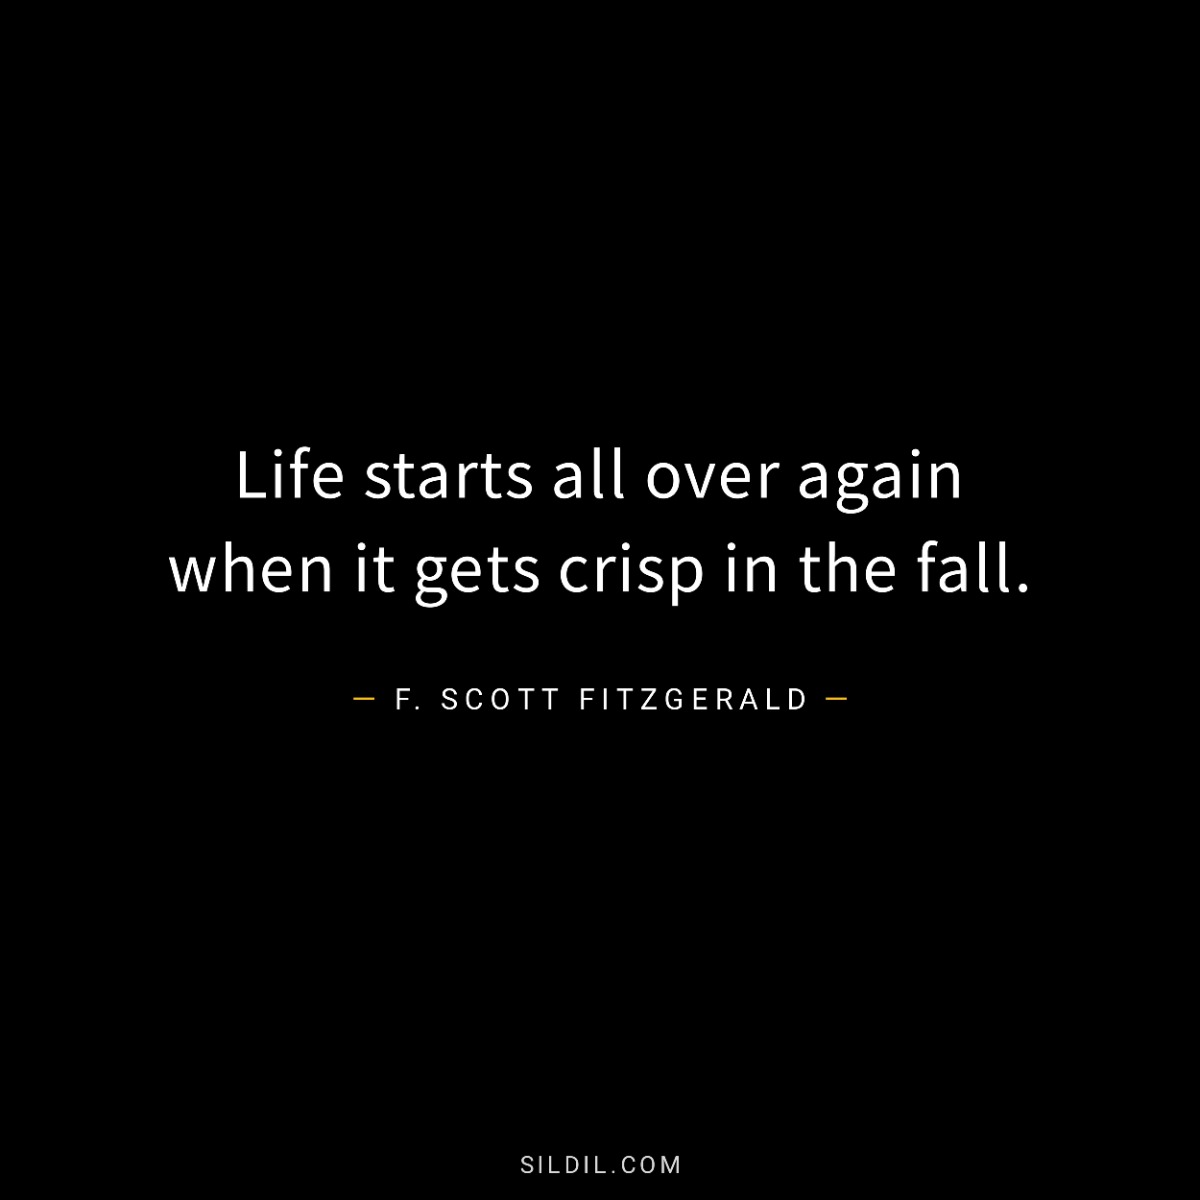 Life starts all over again when it gets crisp in the fall.